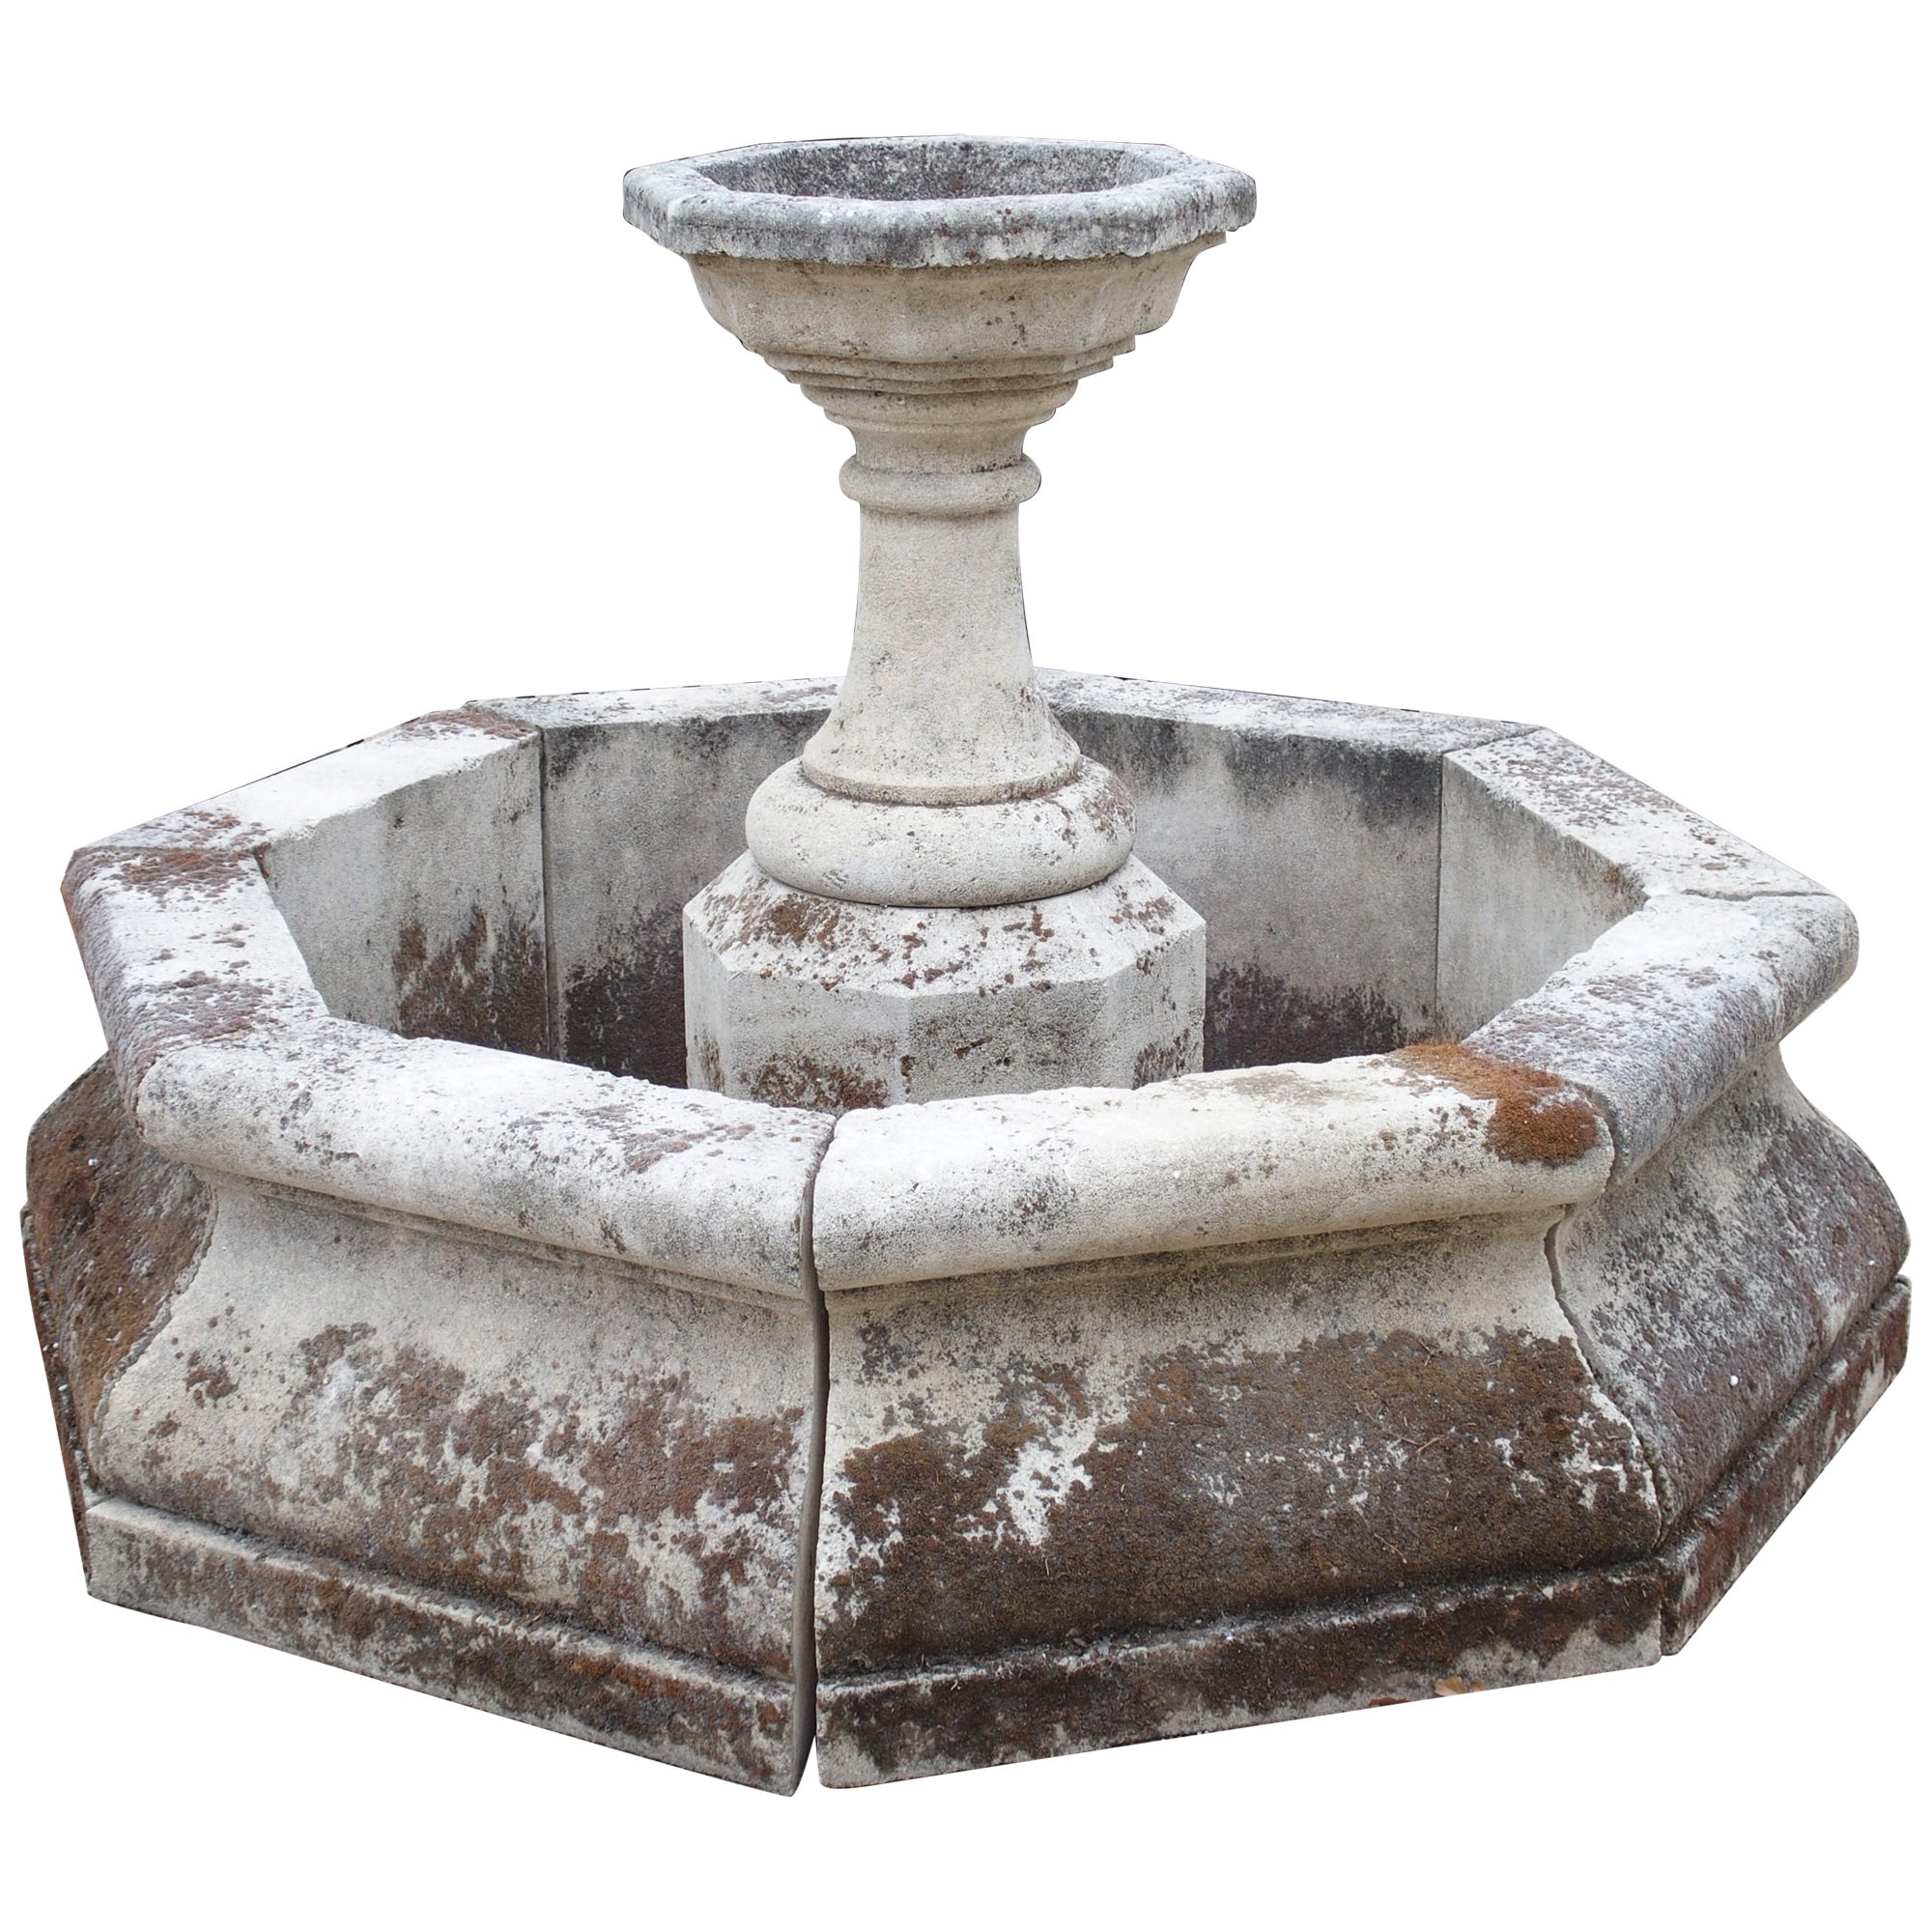 A Charming Carved Limestone Center Fountain from St-Rémy-de-Provence, France